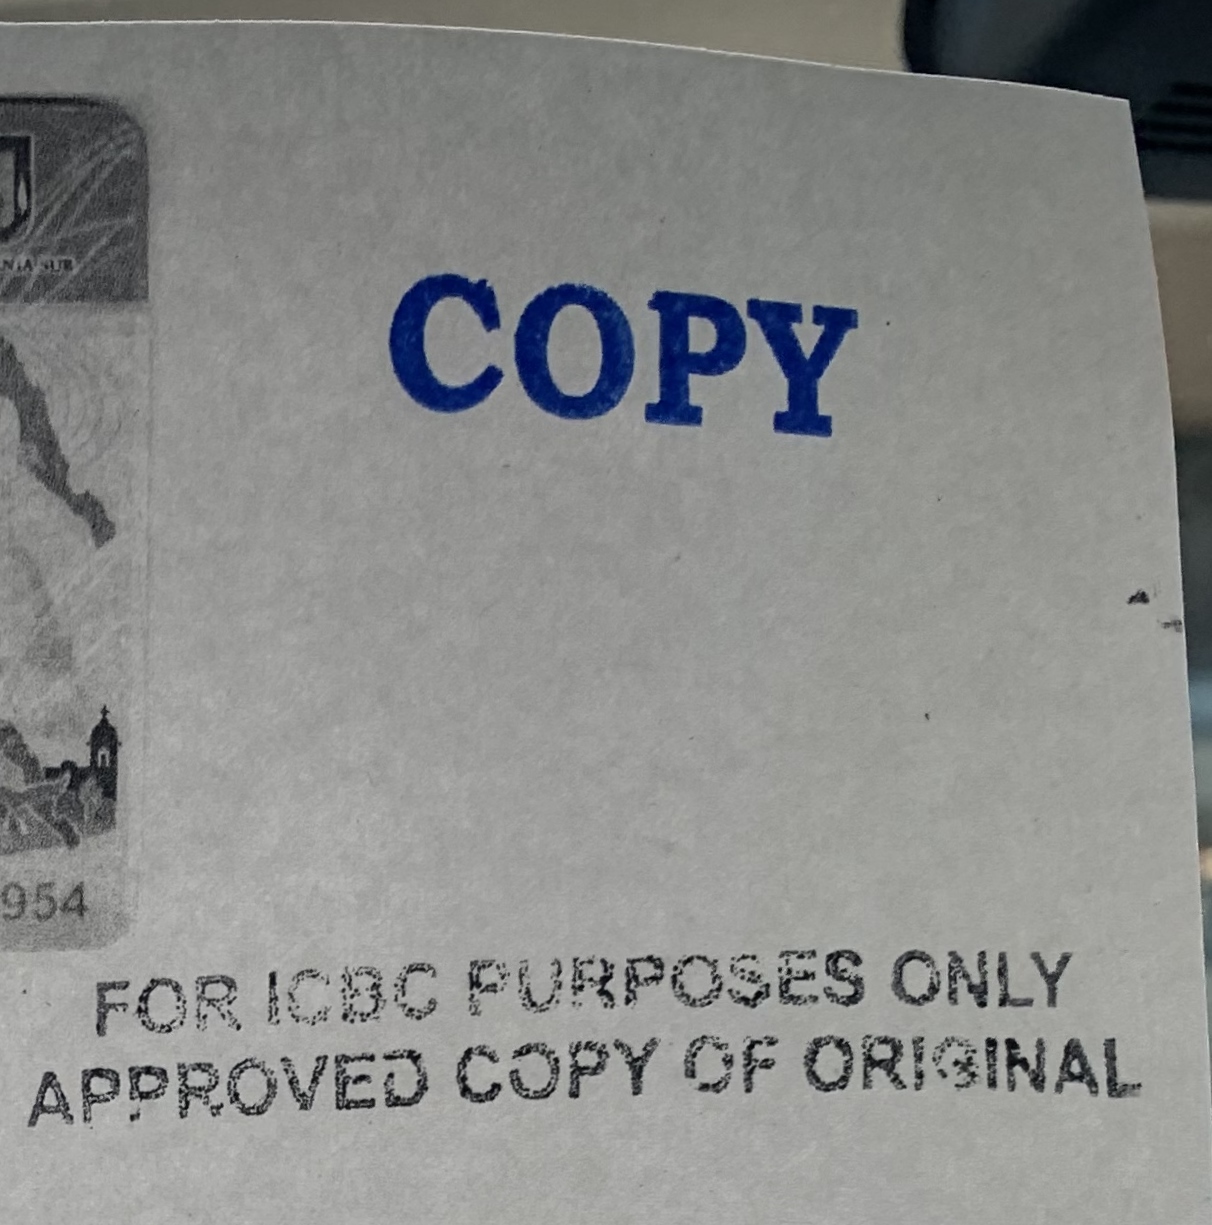 ICBC approval copy stamp